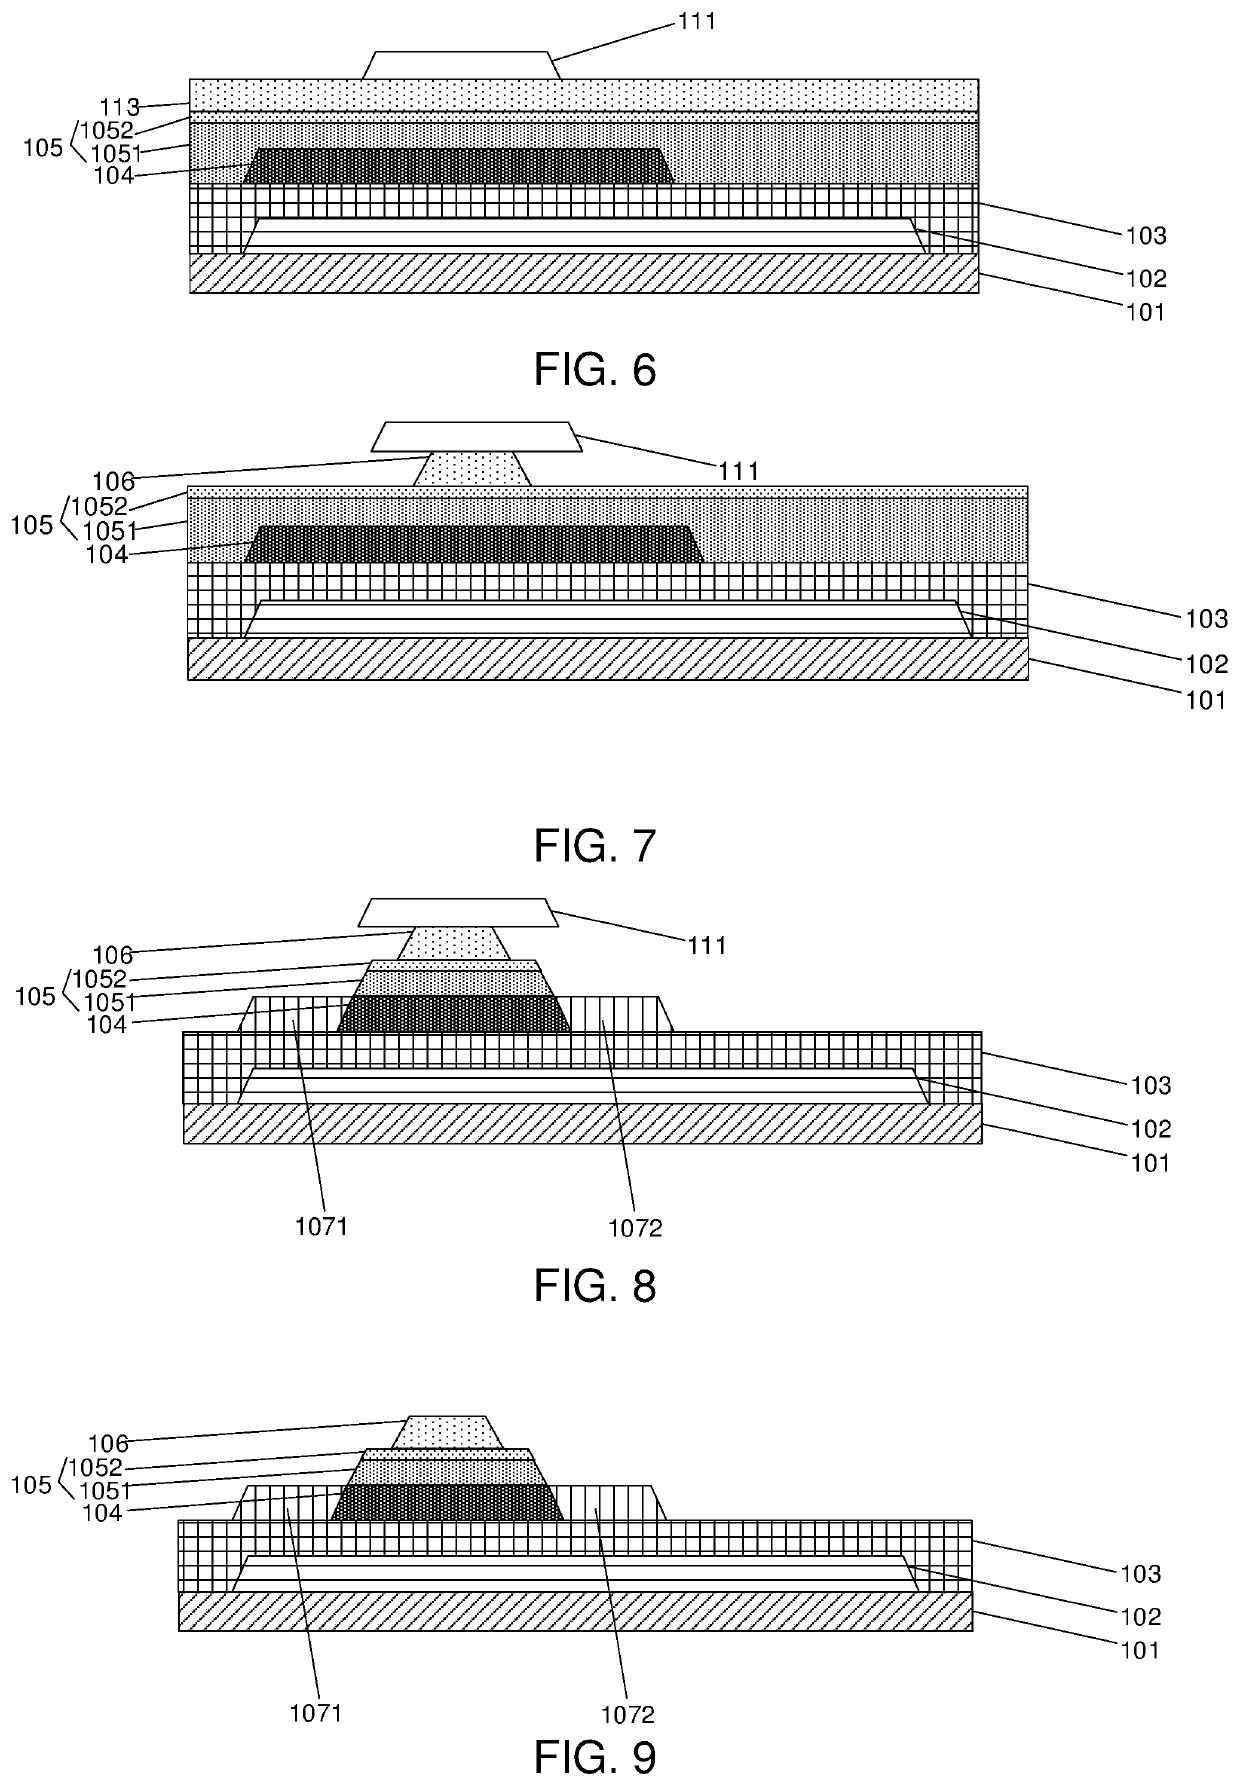 Thin film transistor substrate and method of fabricating same